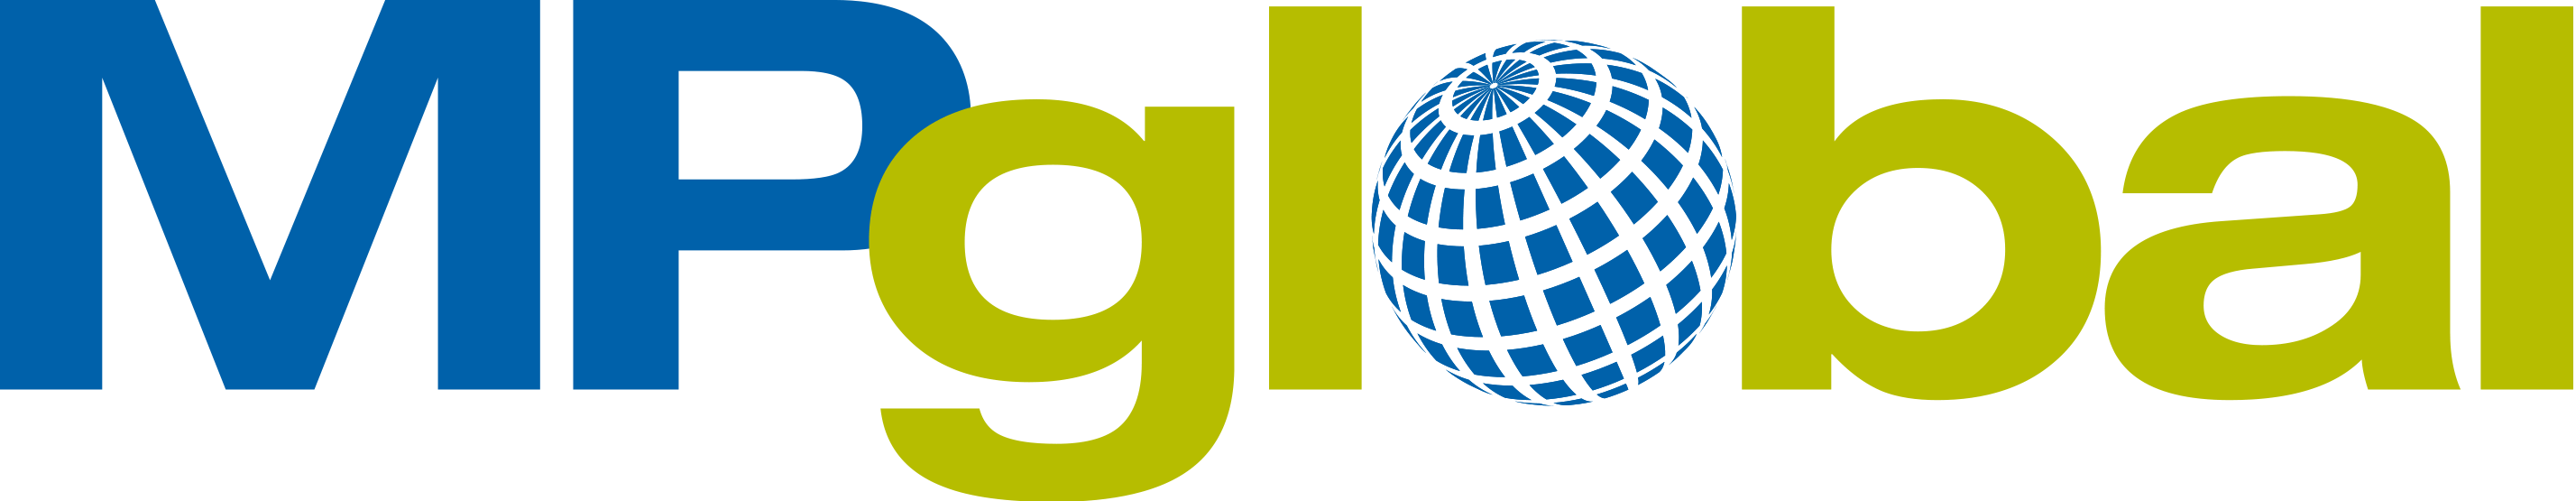 MP Global Products Logo